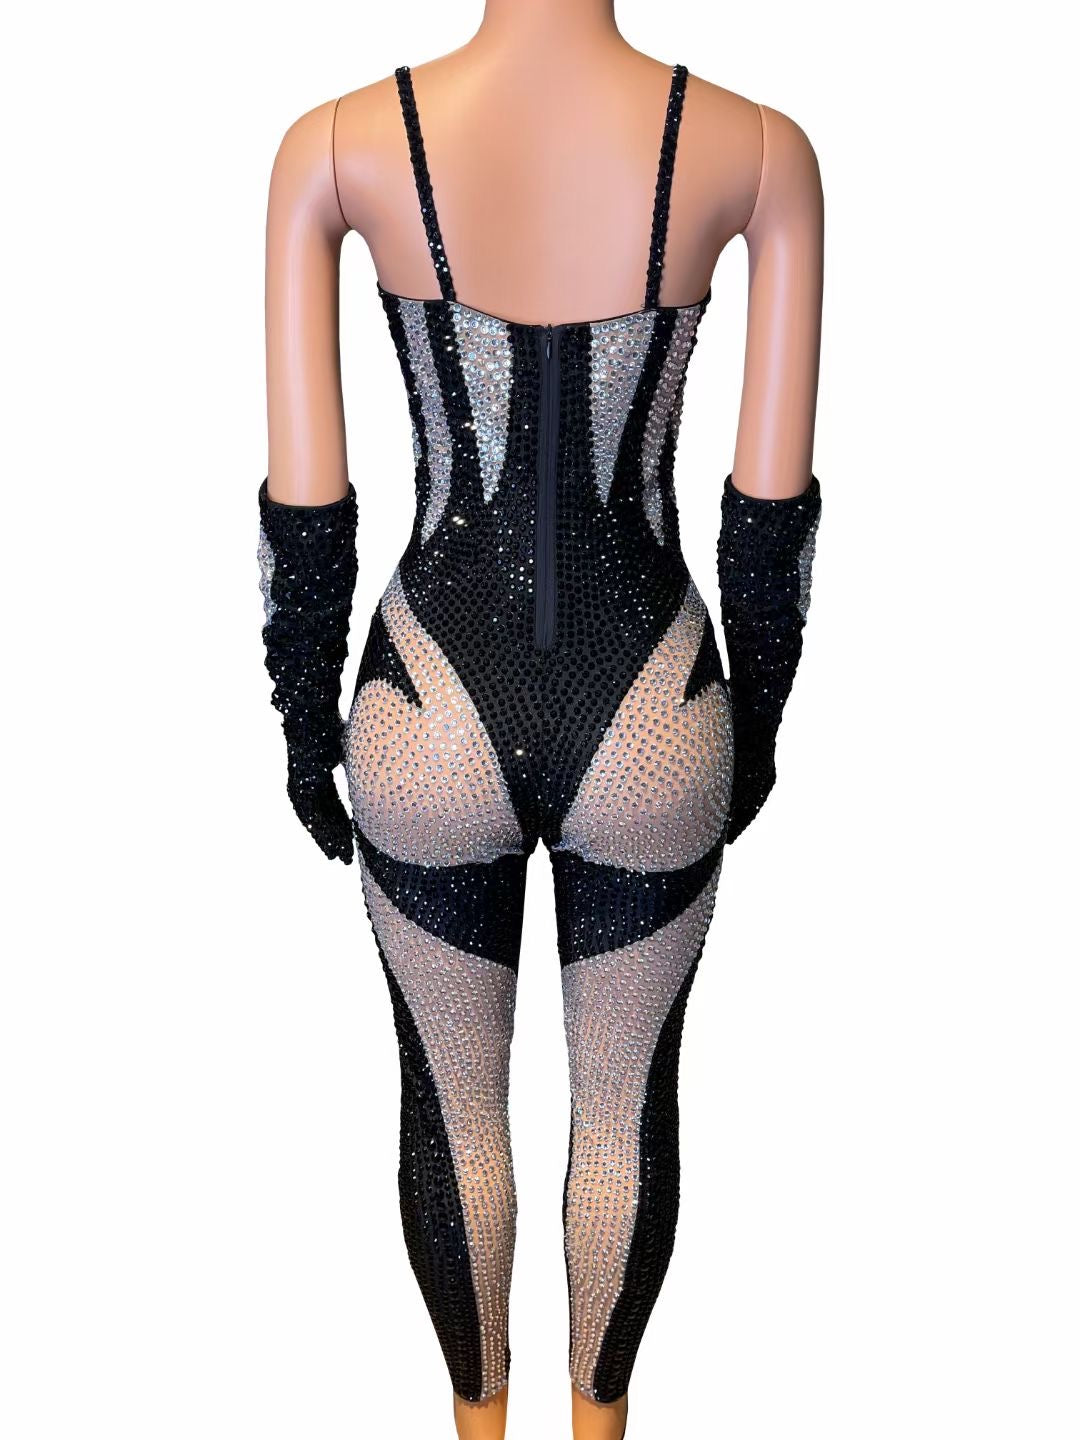 Disaster Bodysuit Black and White High Quality